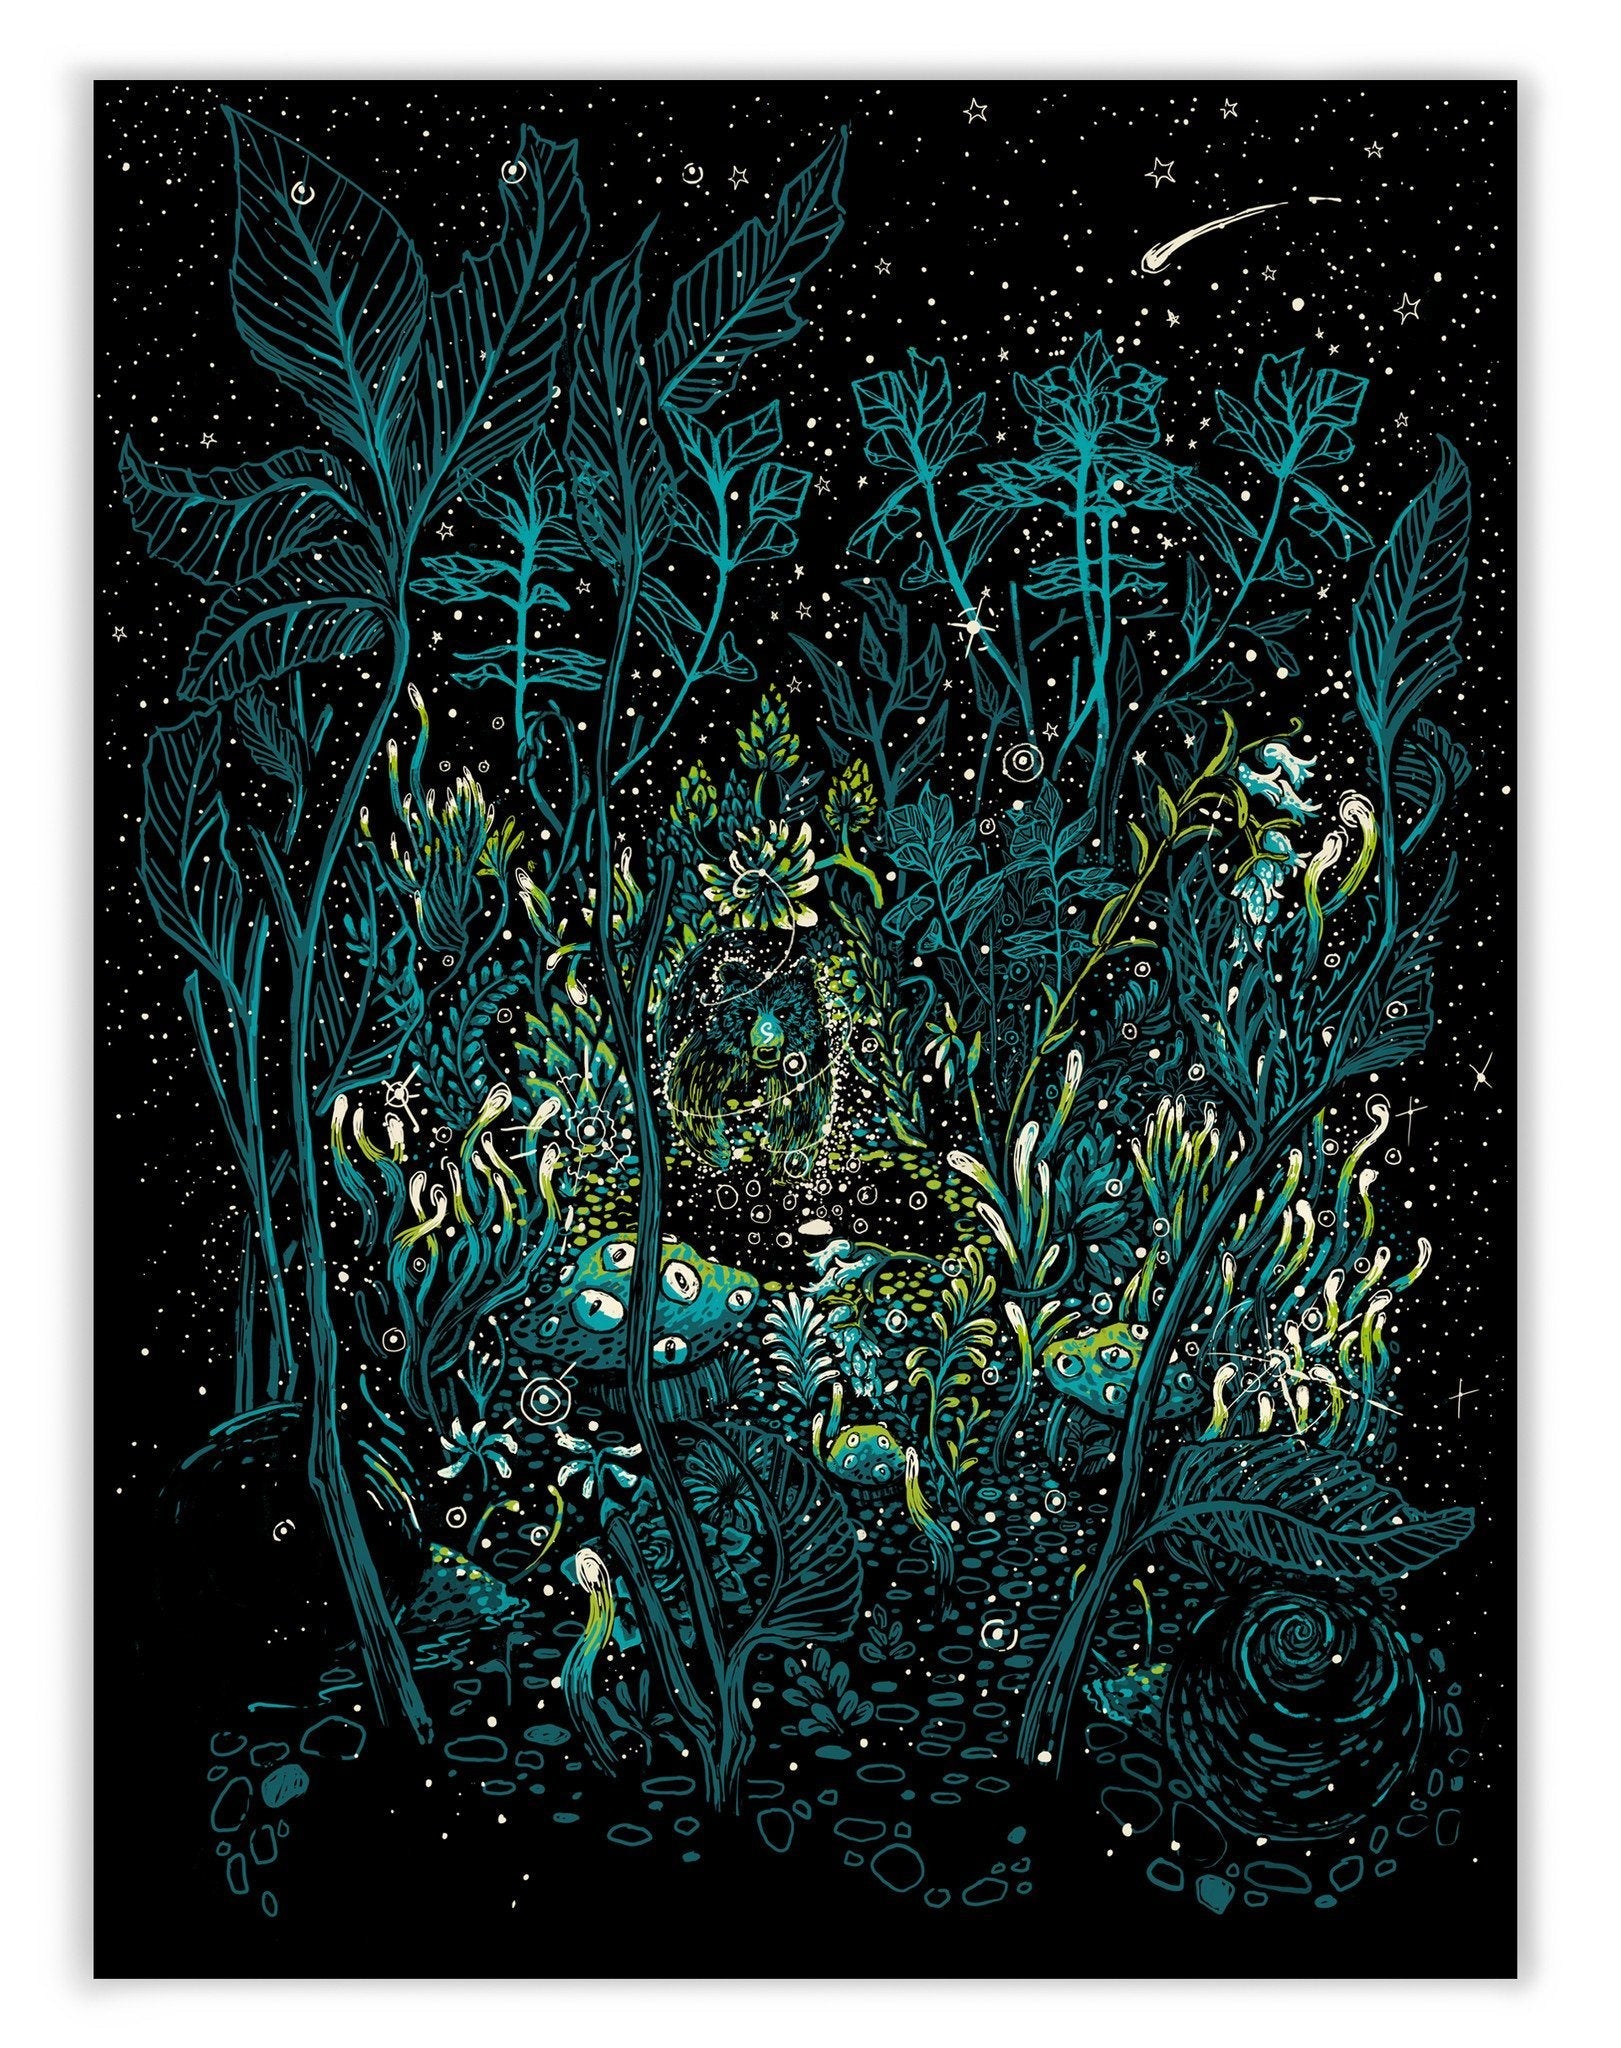 The Squirmie's Slang (Limited Edition of 50) Print James R. Eads